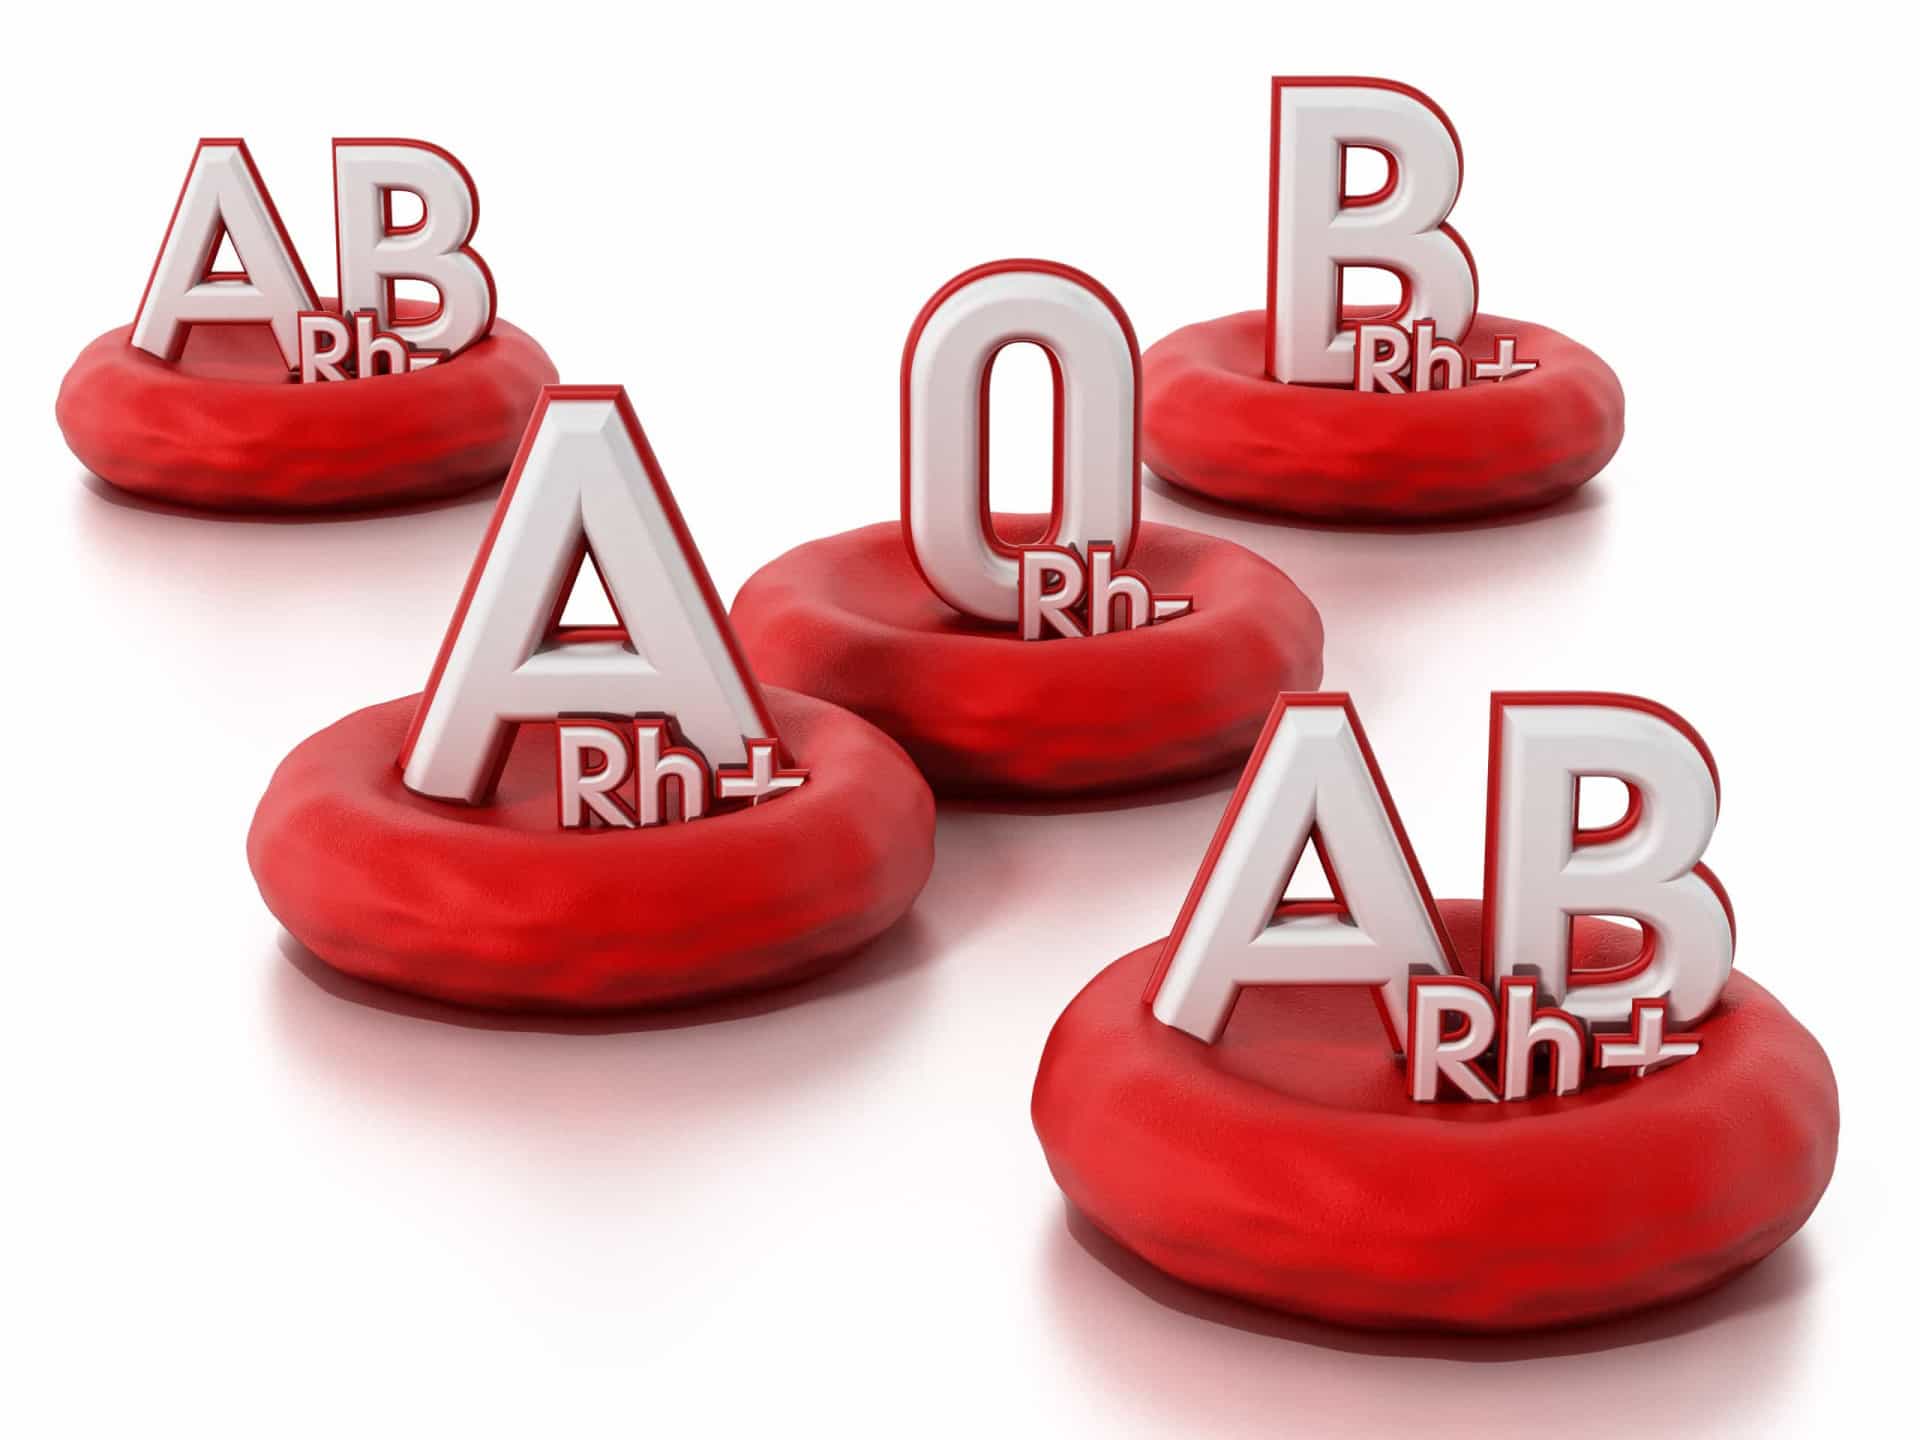 <p>The ABO blood group system classifies blood types according to the different types of antigens in the red blood cells and antibodies in the plasma. Alongside the RhD antigen status, they determine which blood type will match for a safe transfusion.</p><p>You may also like:<a href="https://www.starsinsider.com/n/232341?utm_source=msn.com&utm_medium=display&utm_campaign=referral_description&utm_content=516686en-us"> Diseases and infections that can kill you within 24 hours</a></p>